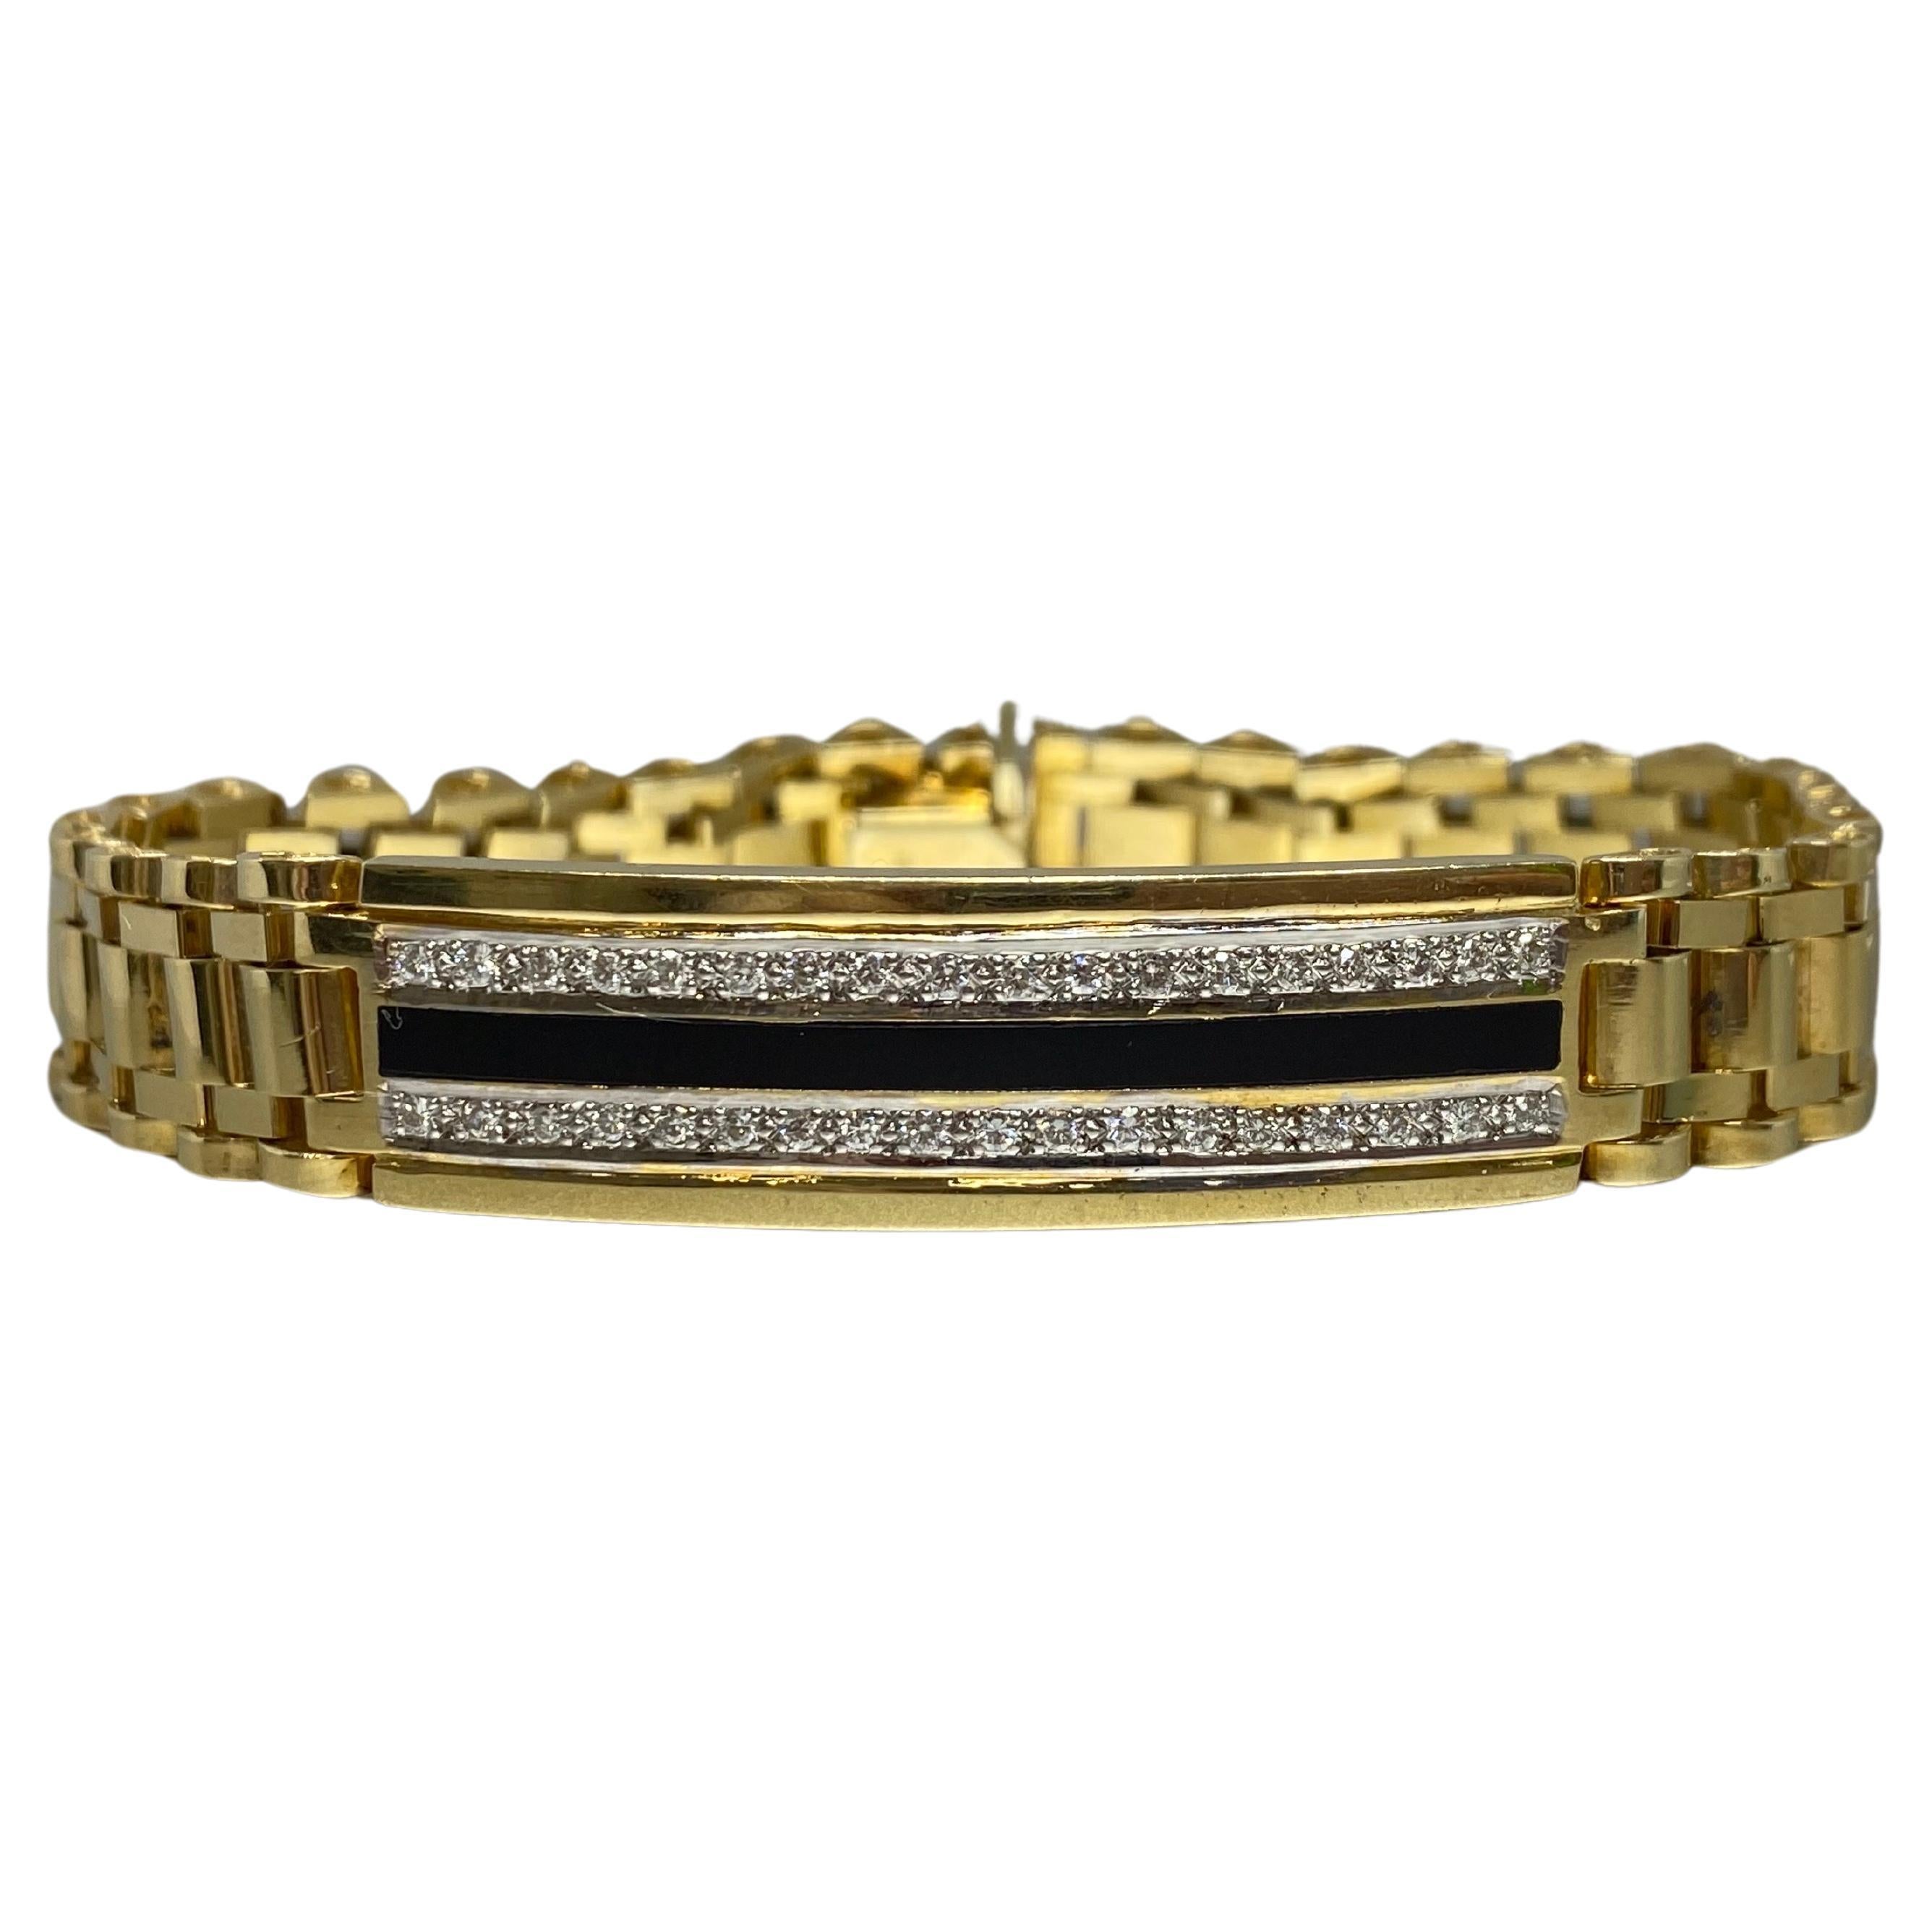 This is an eye-catching men's or unisex bracelet, crafted from 14k yellow gold with the popular jubilee design band in a polished finish. The front of the bracelet has a long curved bar decorated with a row of round brilliant cut diamonds  on either